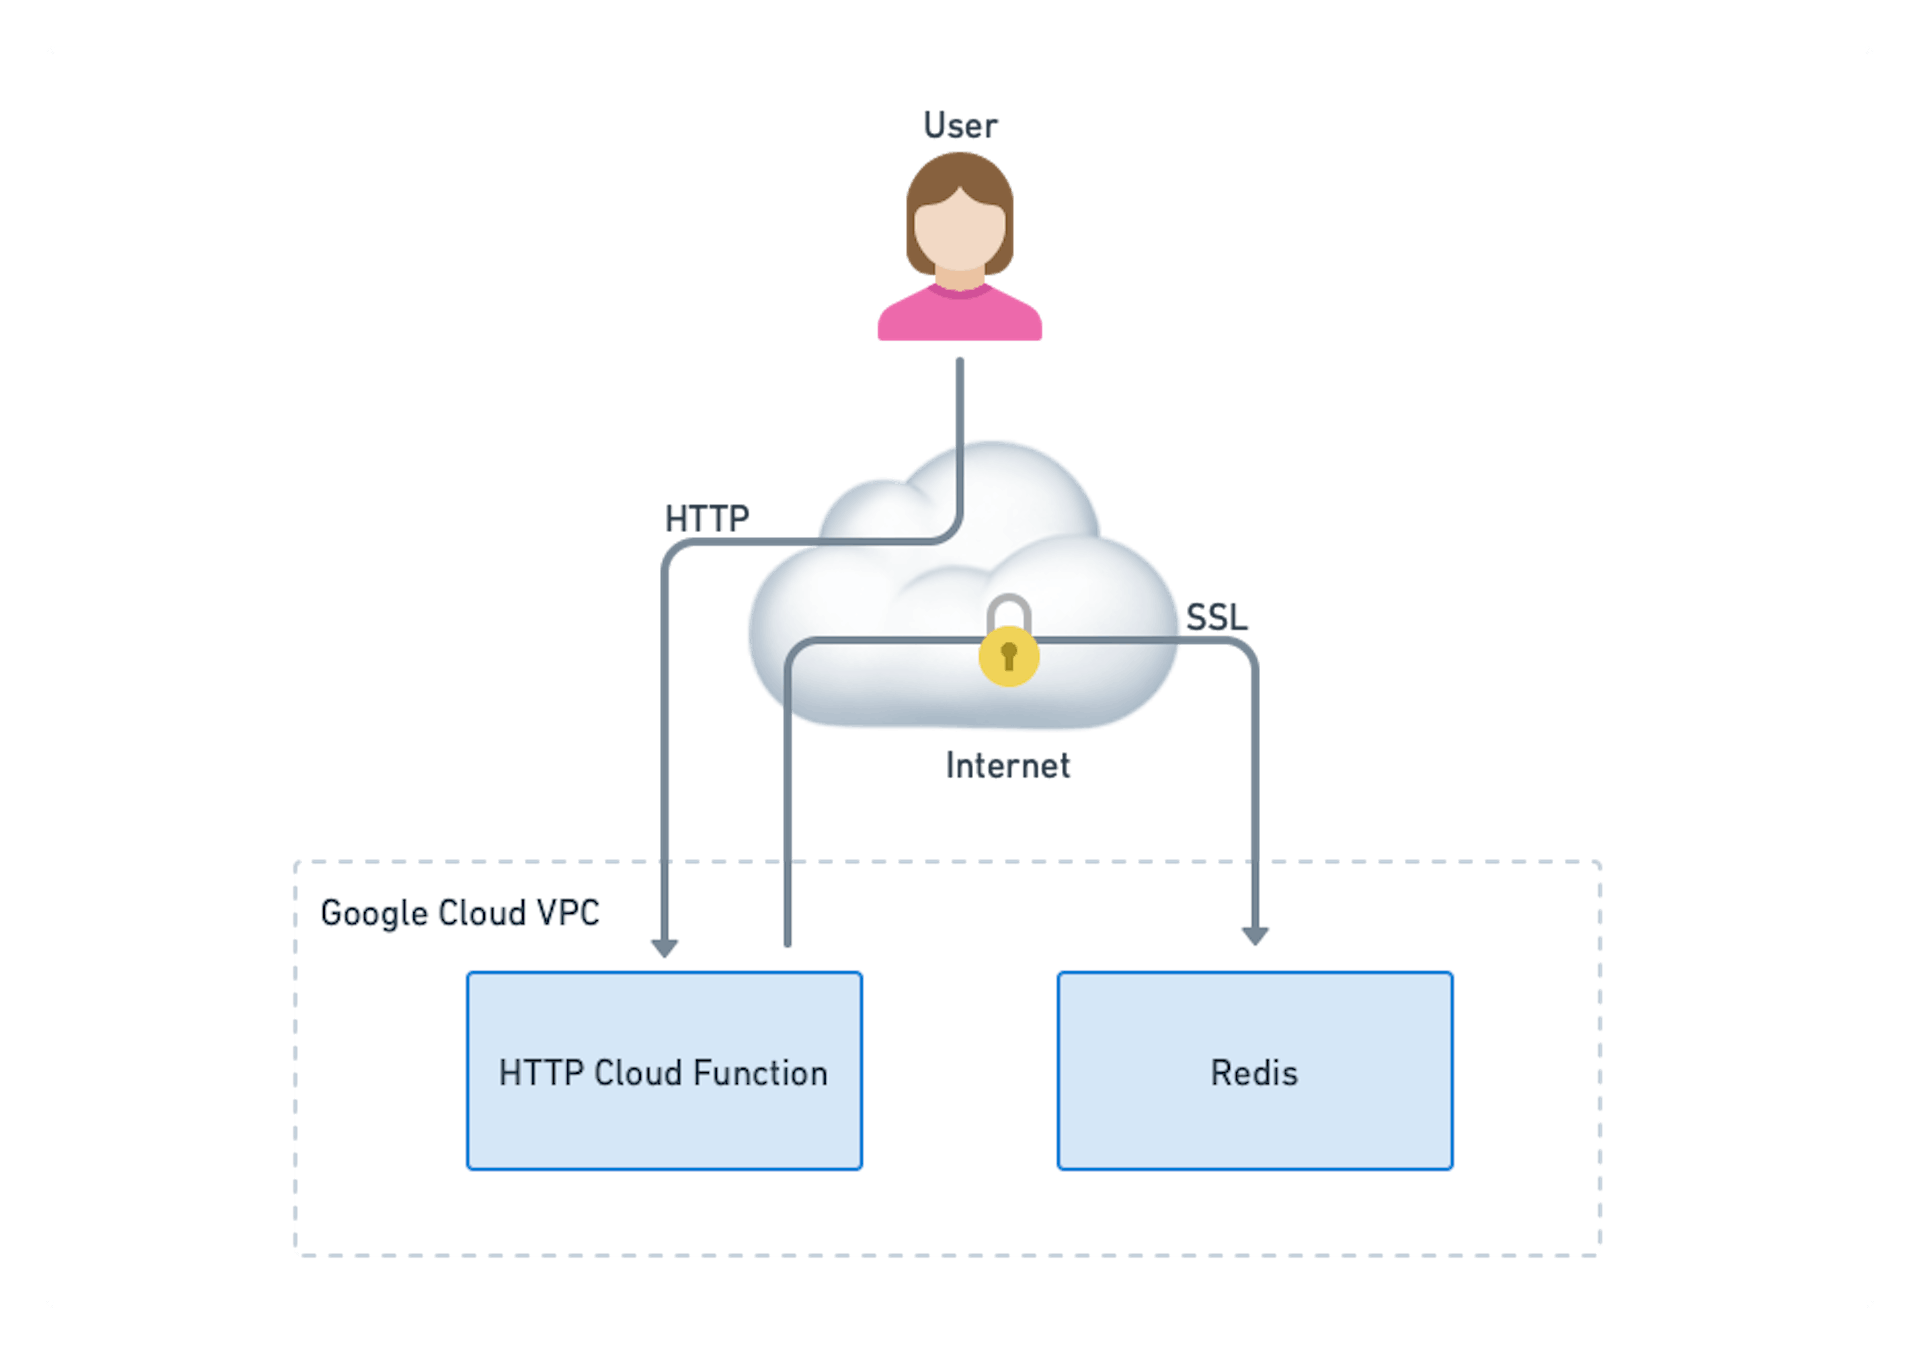 The cost-efficient and safe architecture that runs the backend code via Cloud Functions and communicates with Redis over a secure mTLS connection